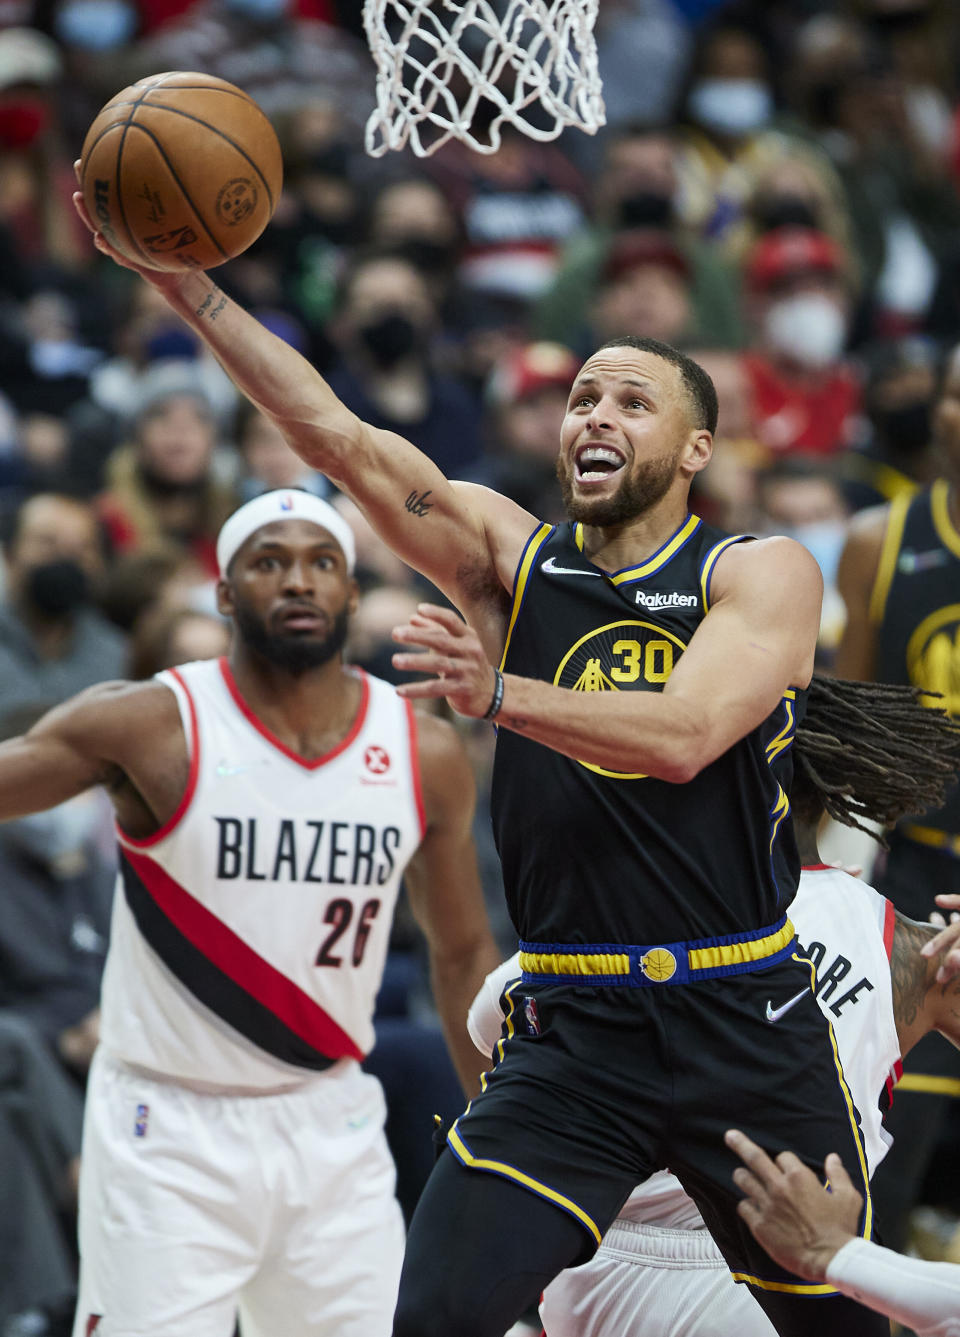 Golden State Warriors guard Stephen Curry, right, shoots in front of Portland Trail Blazers forward Justise Winslow during the first half of an NBA basketball game in Portland, Ore., Thursday, Feb. 24, 2022. (AP Photo/Craig Mitchelldyer)